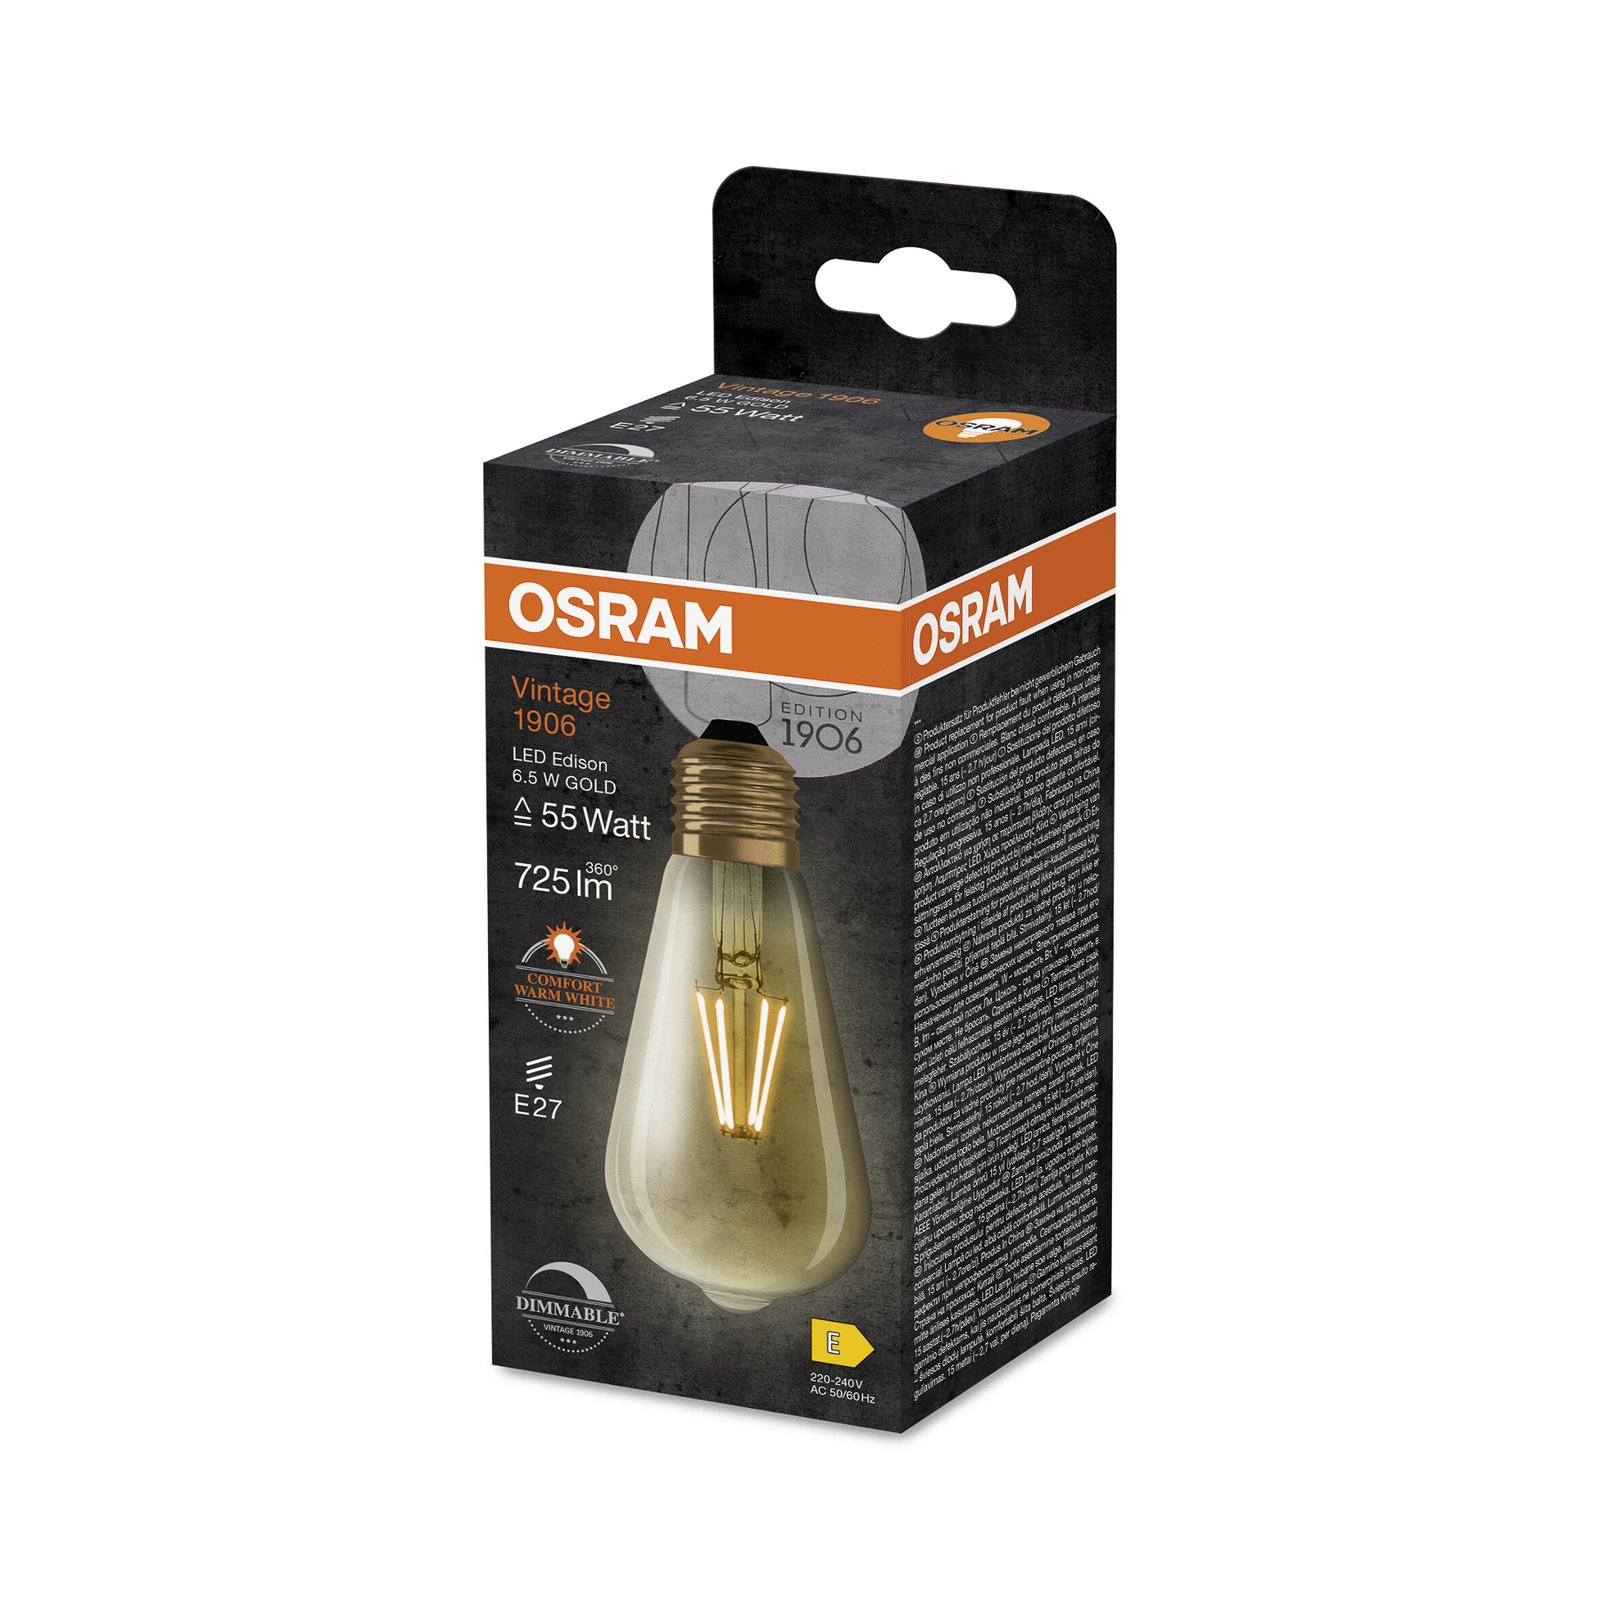 OSRAM LED Vintage 1906 Edison, gold, E27, 6.5 W, 824, dimmable.